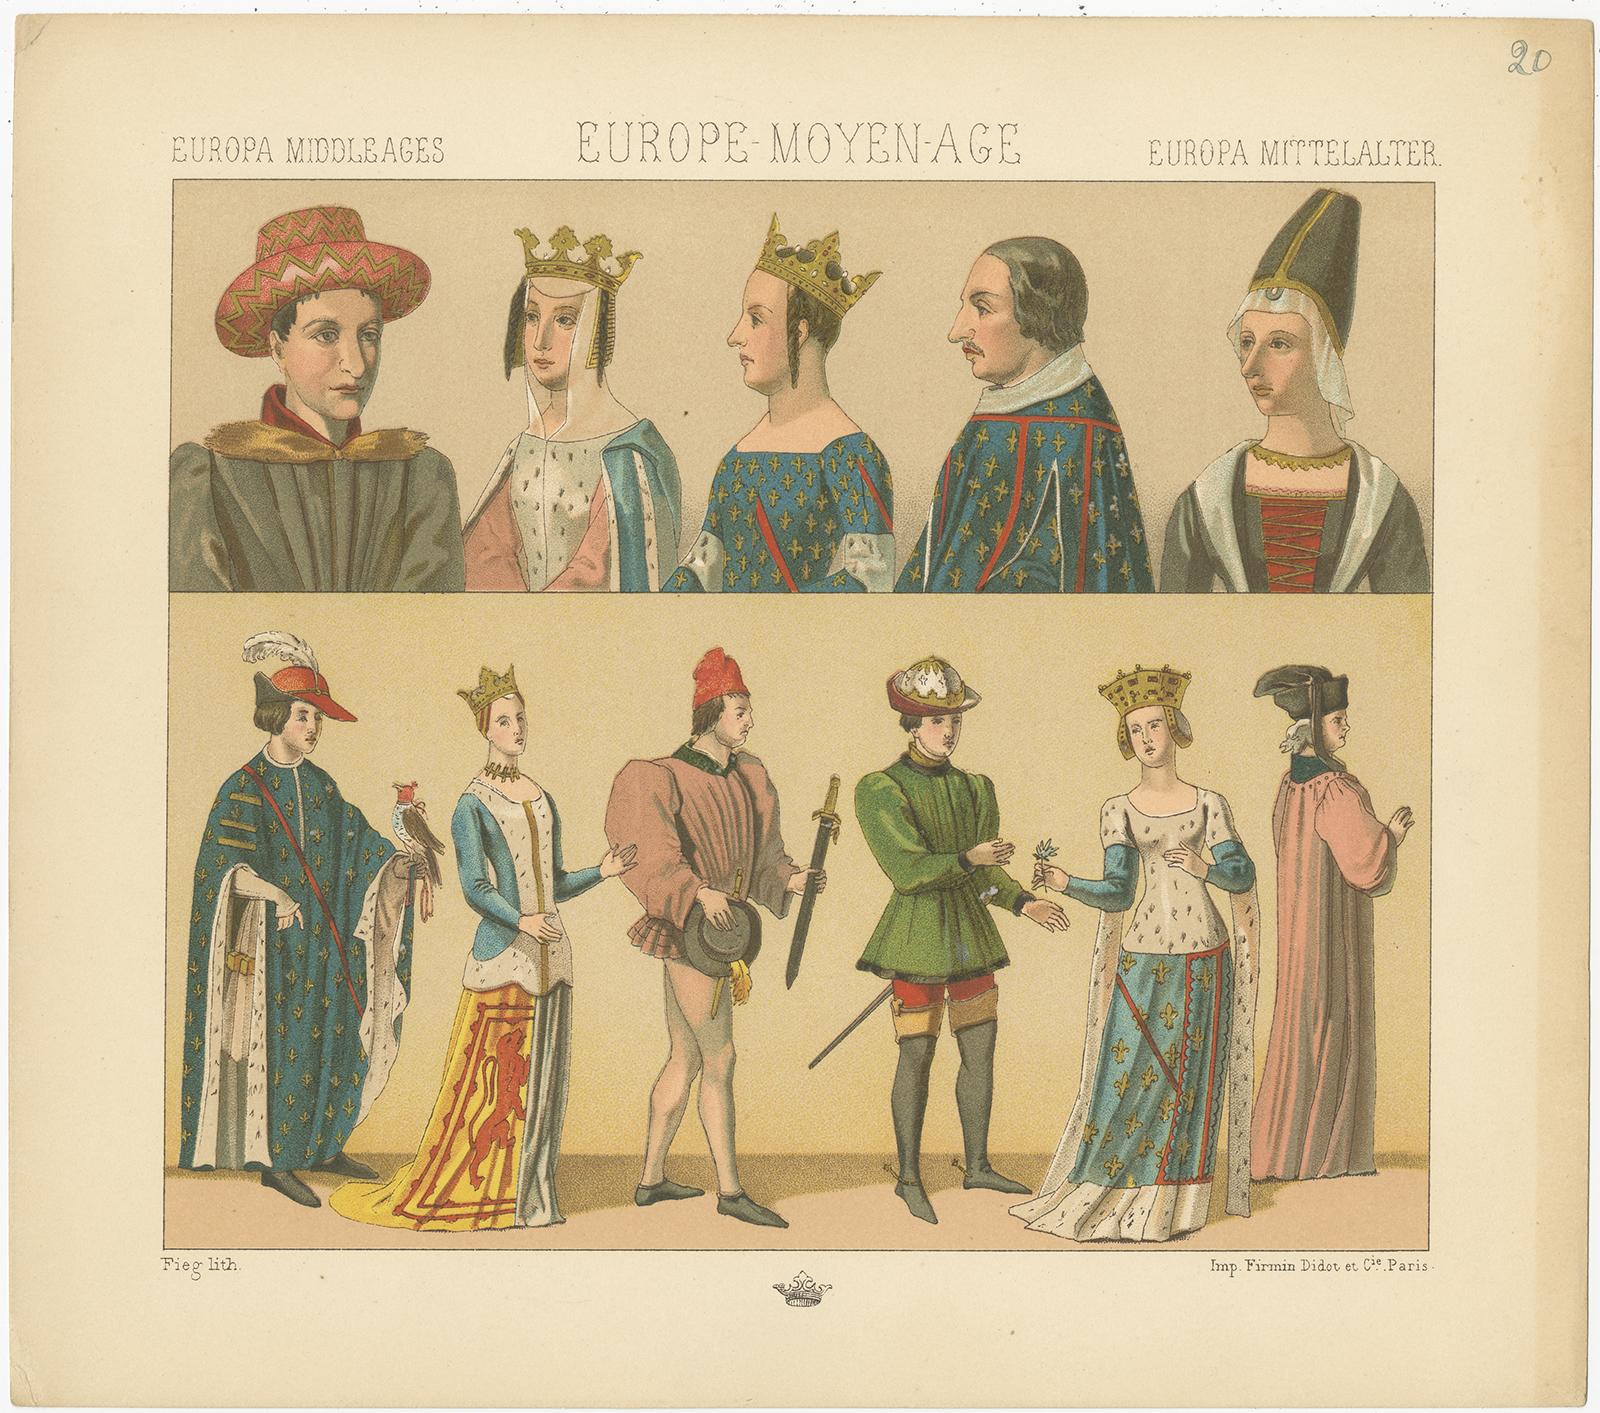 Antique print titled 'Europa Middle Ages - Europe Moyen Age- Europa Mittelalter'. Chromolithograph of European Costumes. This print originates from 'Le Costume Historique' by M.A. Racinet. Published, circa 1880.